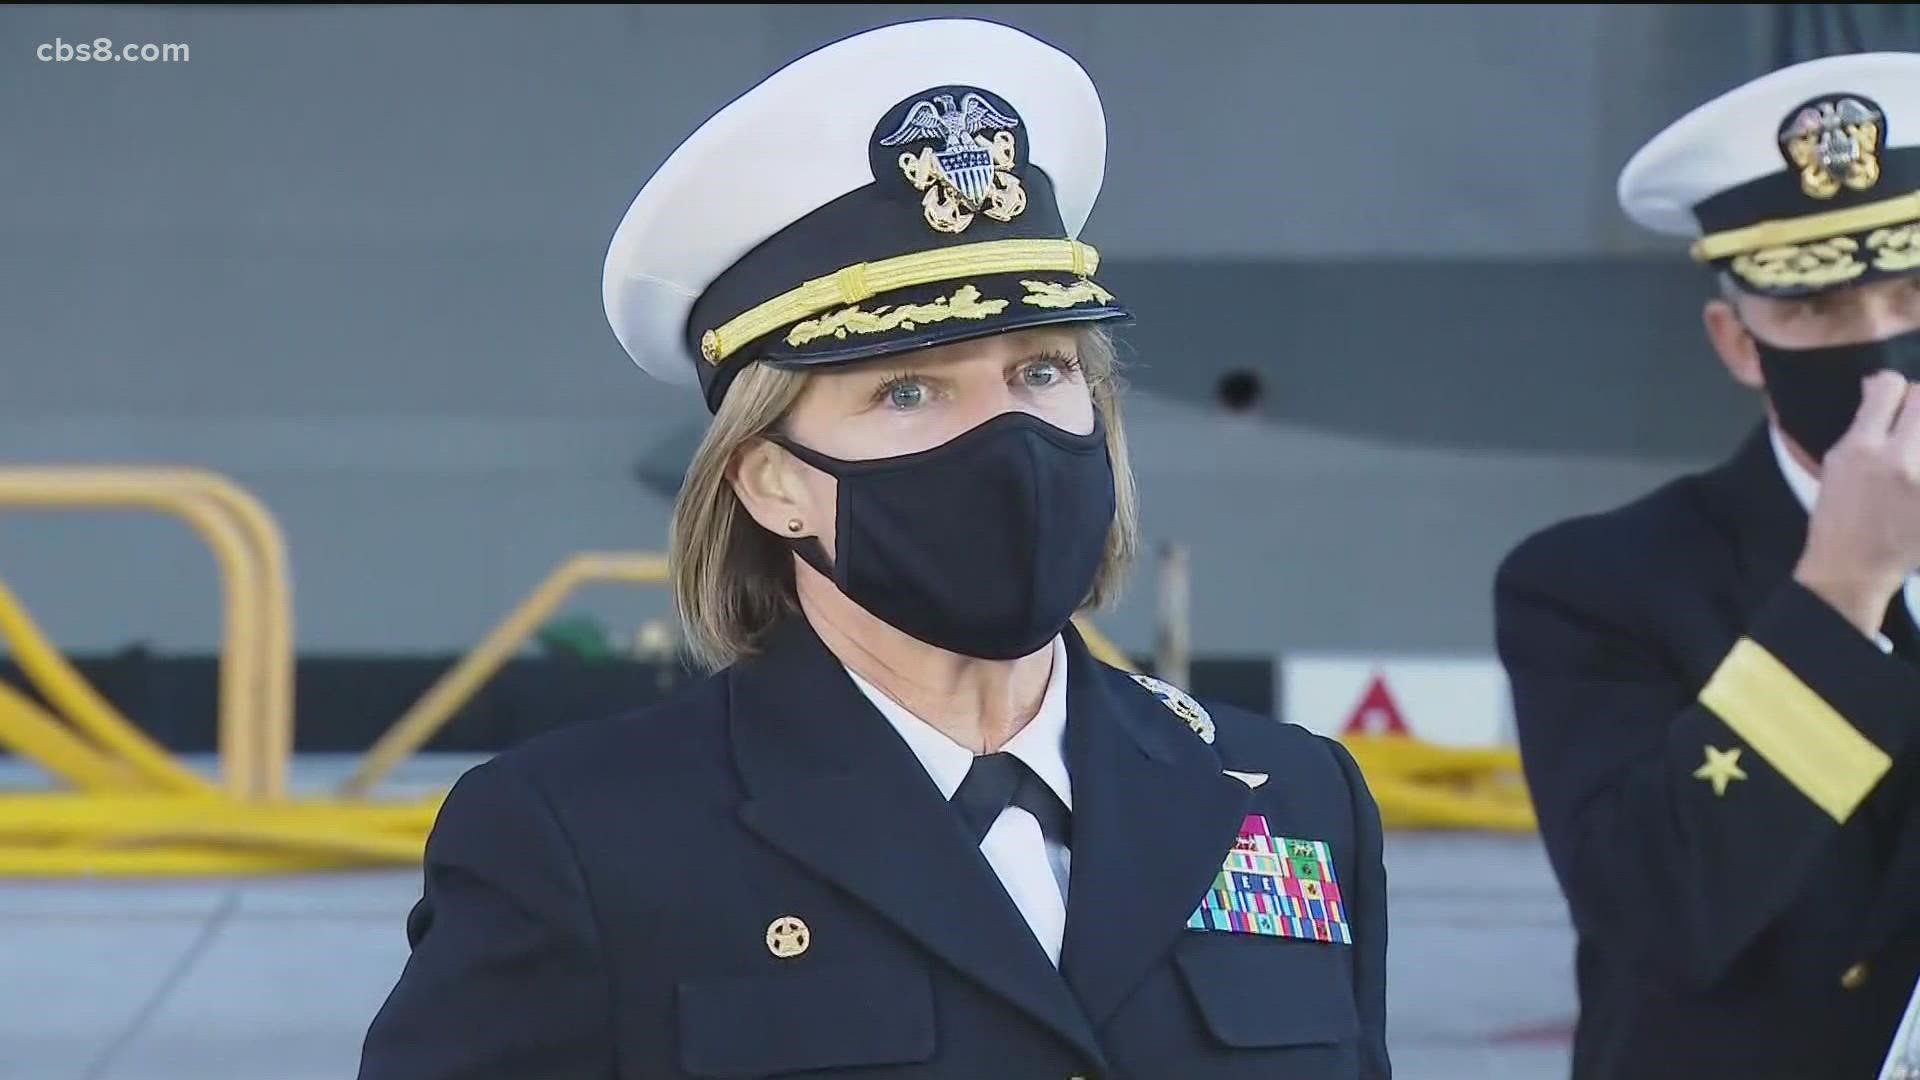 It's the first deployment of 2022 under Capt. Amy Bauernschmidt, the first woman to lead a nuclear carrier in U.S. Navy history.